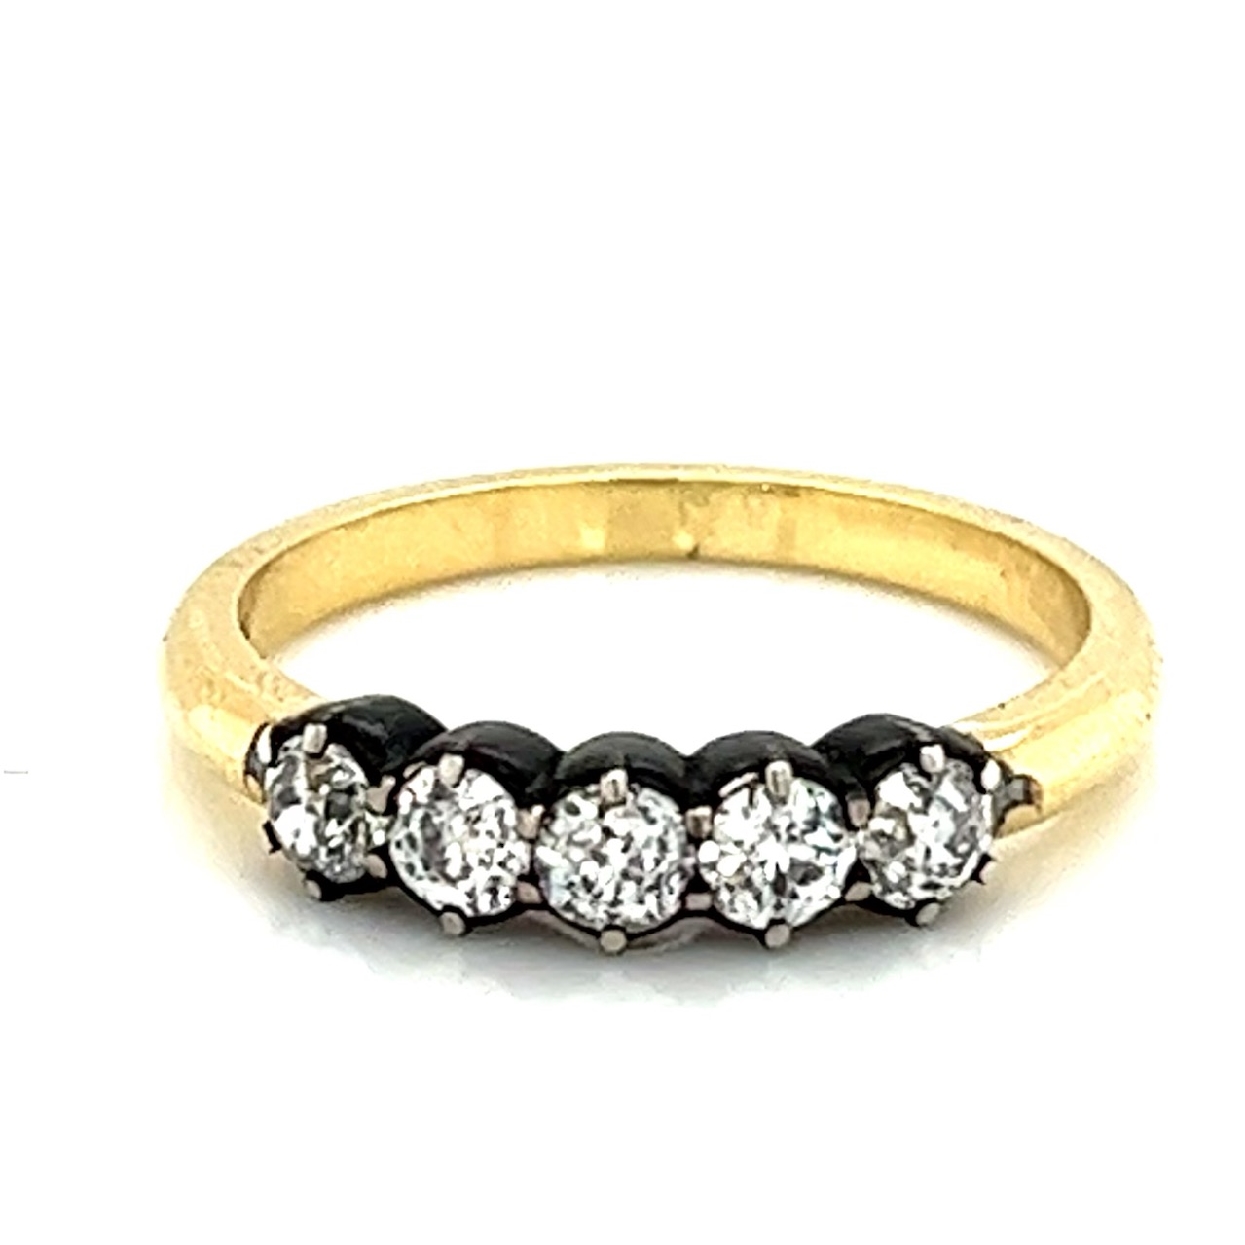 18K Yellow Gold Ring with Old Mine Cut Diamonds and Applied Patina Silver
0.6cttw IJK/SI
Size 6.75